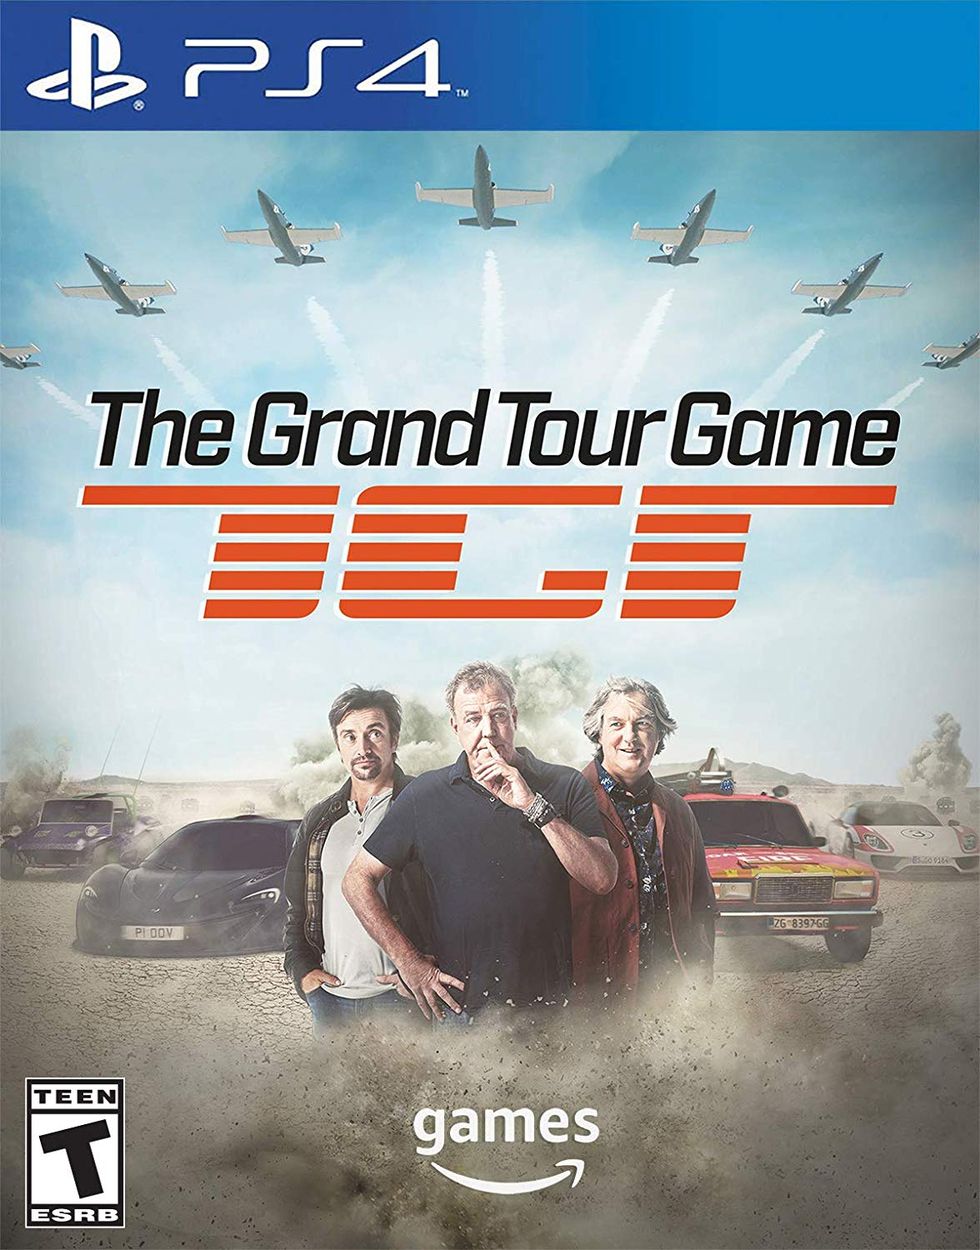 The Grand Tour Show Is Now a Video Game - How to Preorder